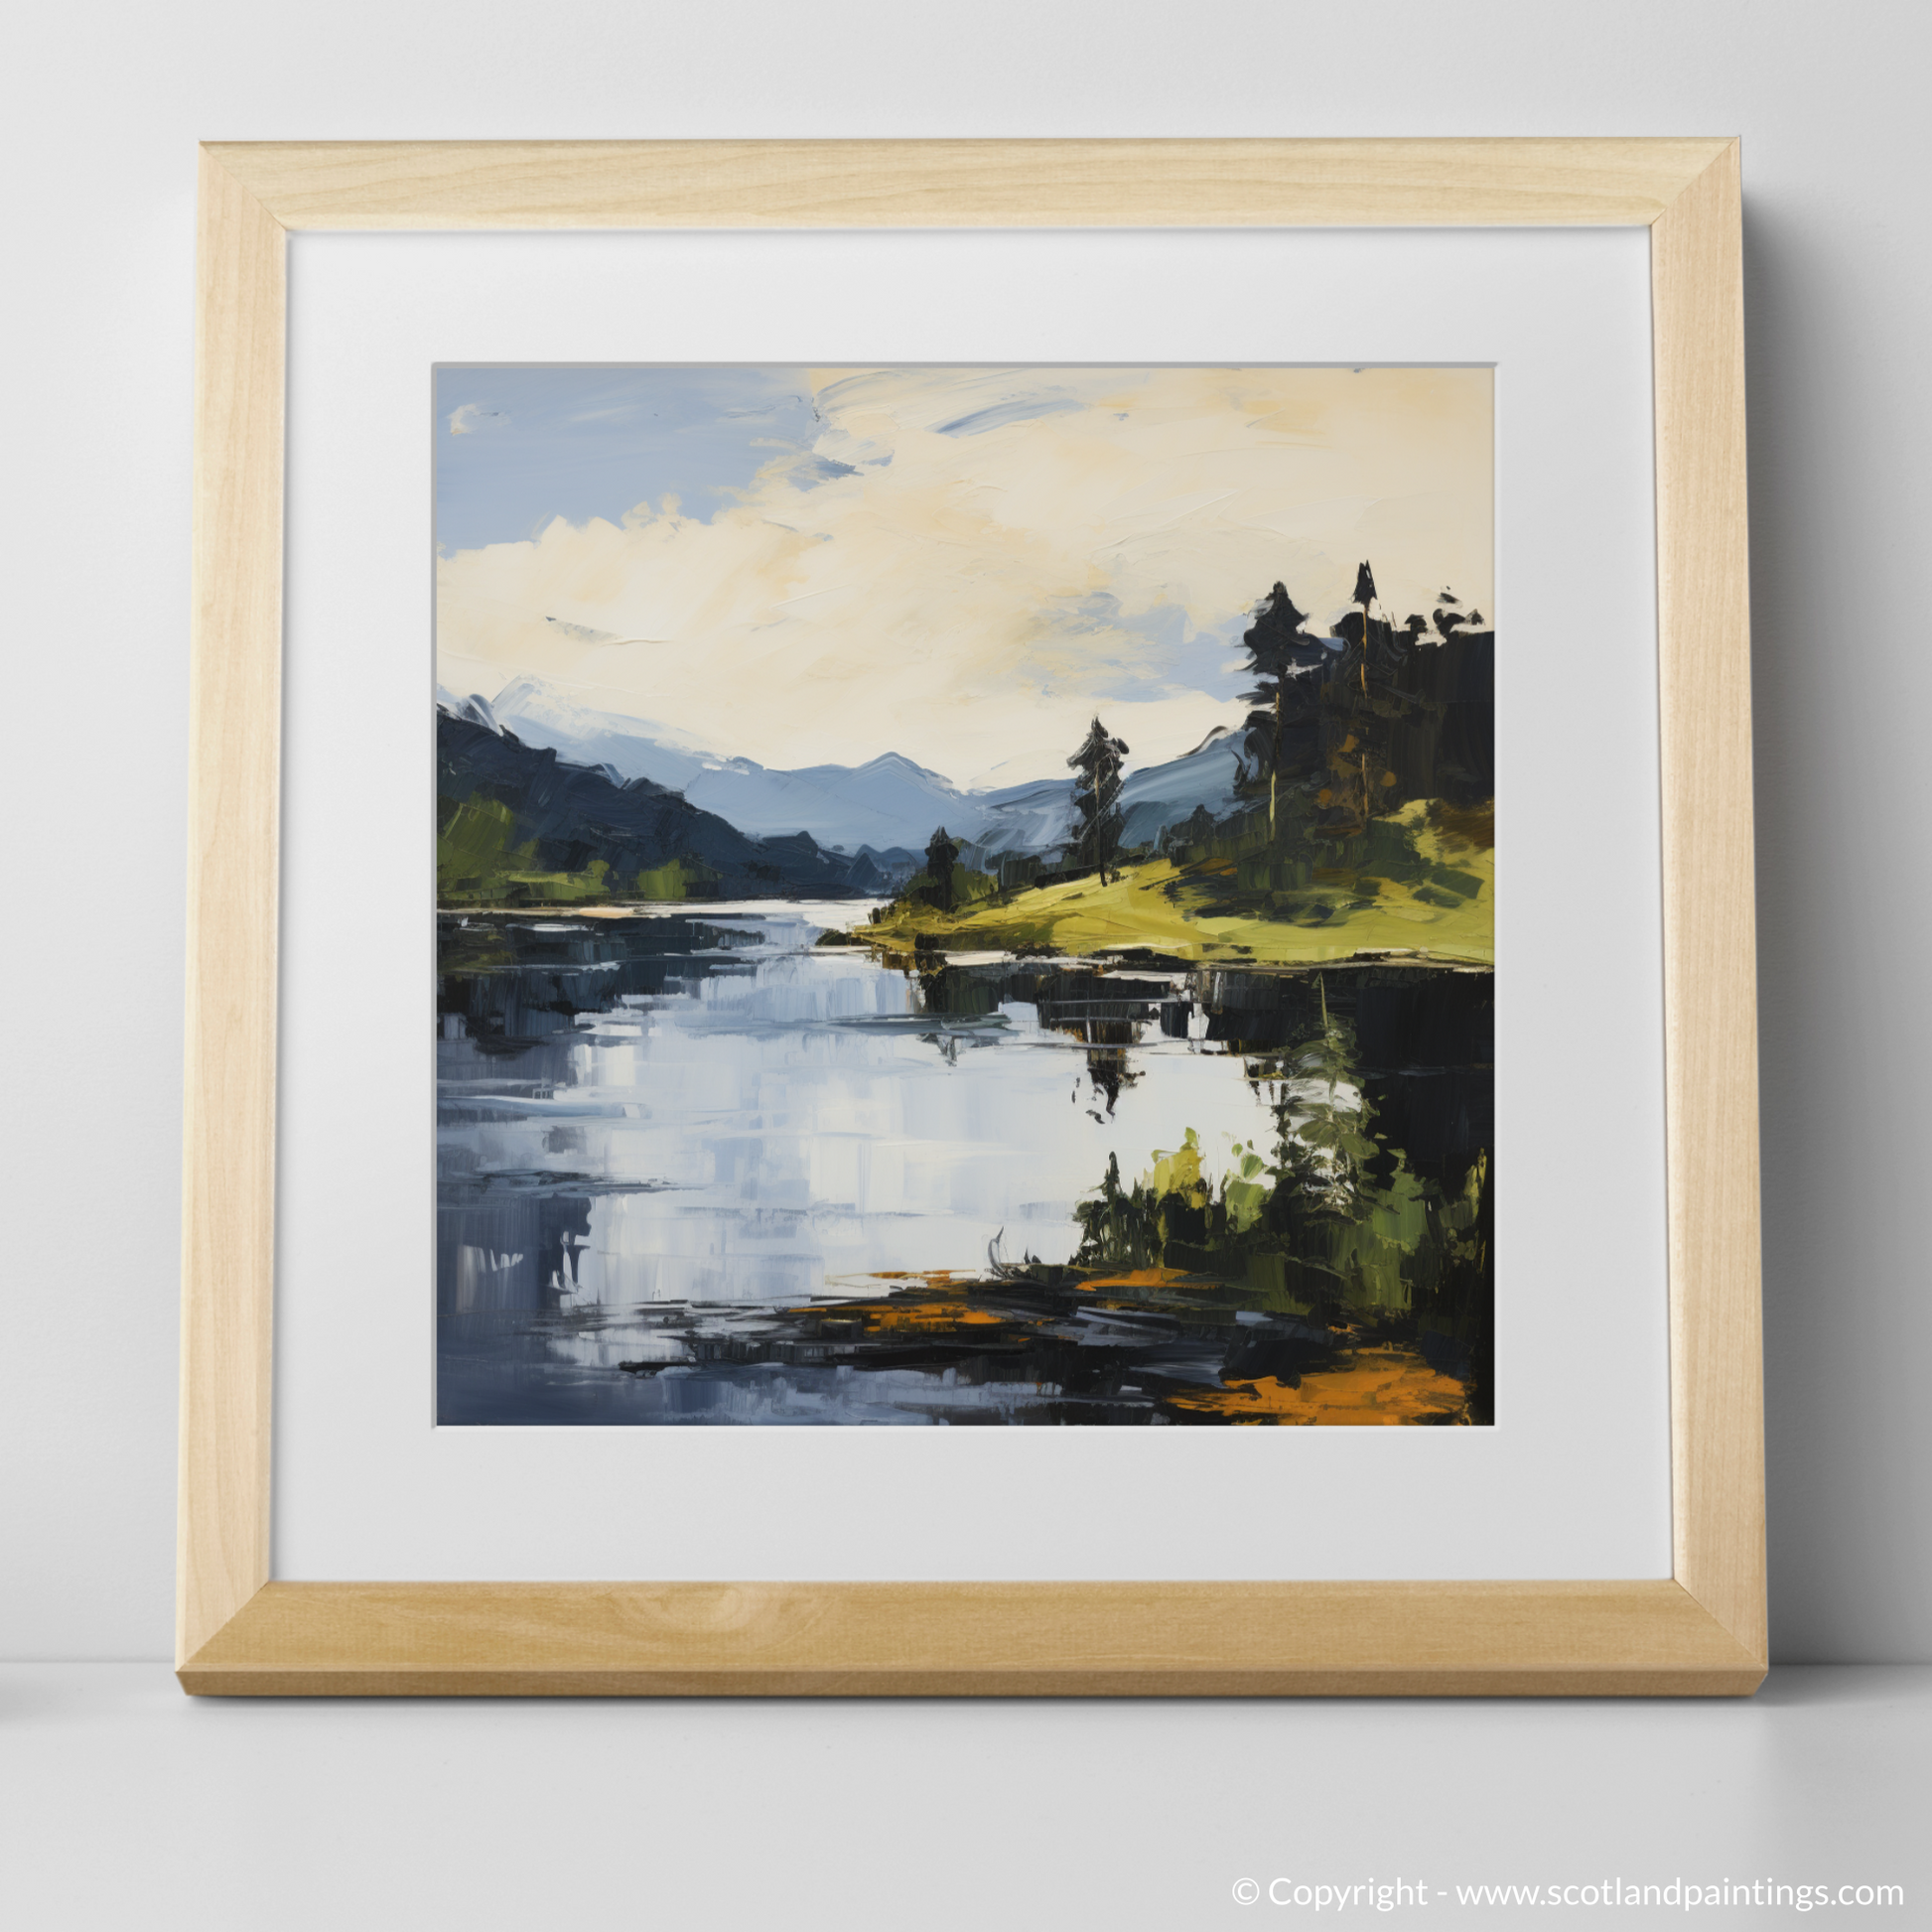 Art Print of Loch Ard, Stirling in summer with a natural frame